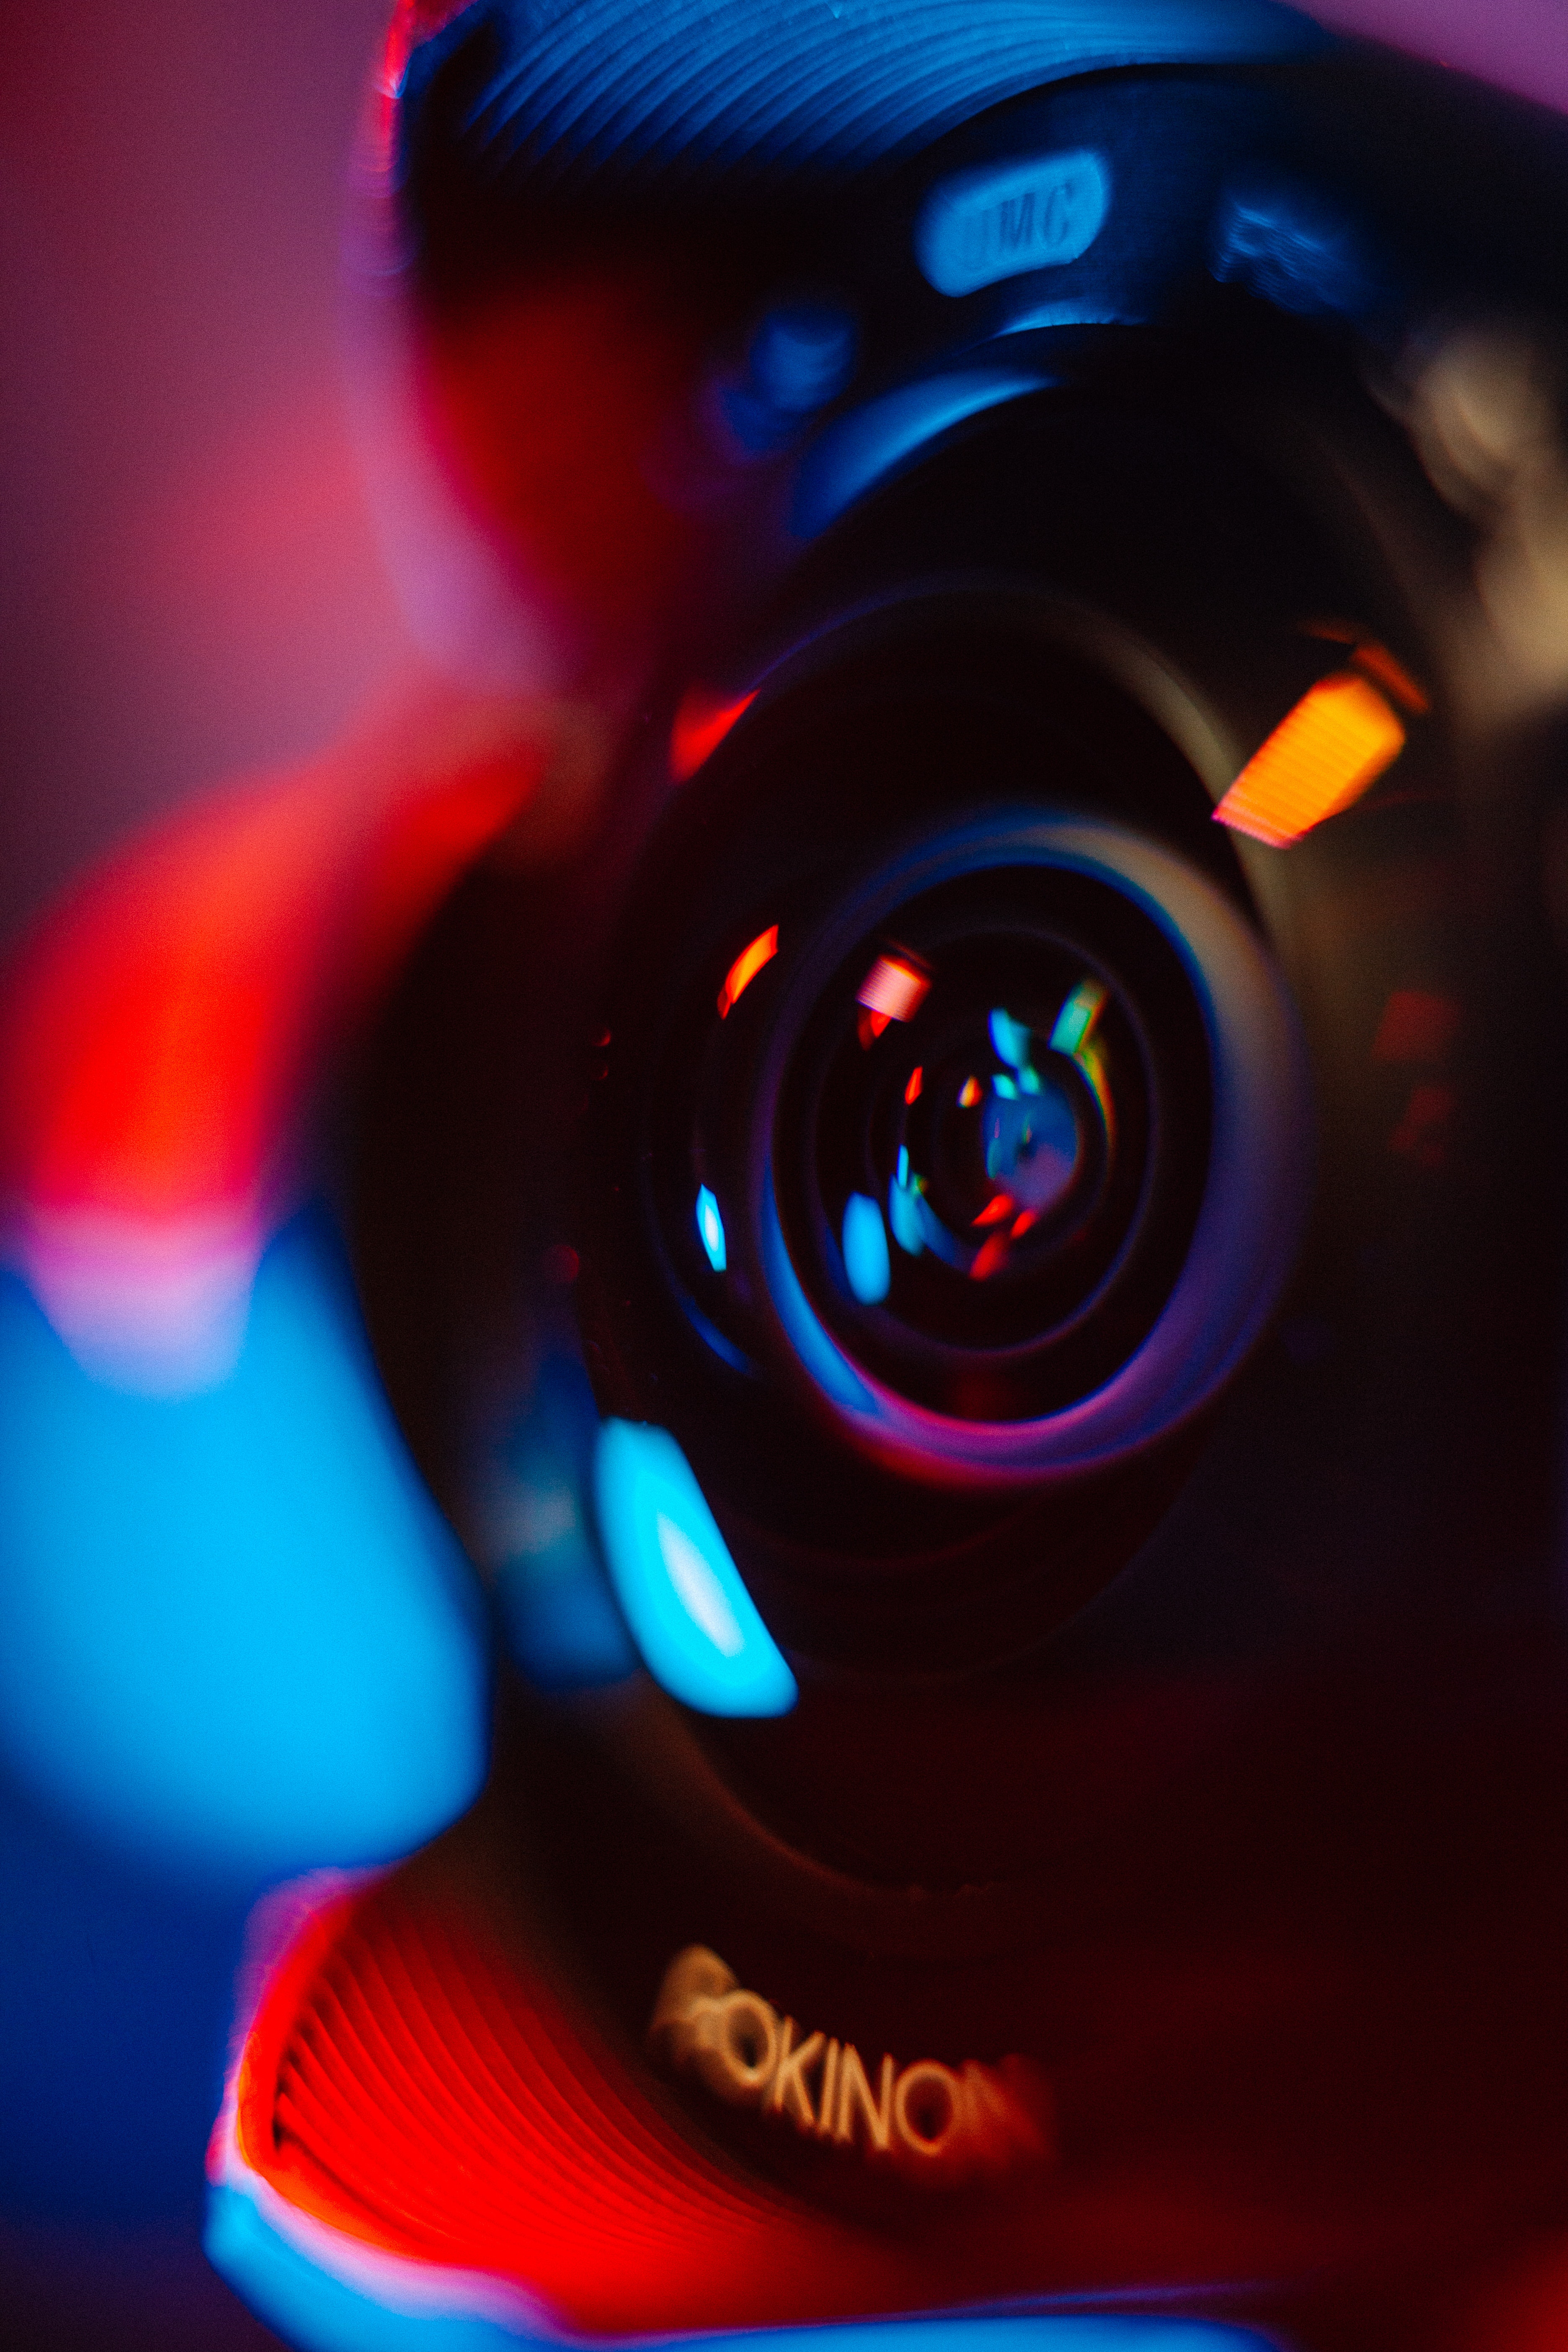 technology, lens, technologies, glare, multicolored, motley, blur, smooth, camera